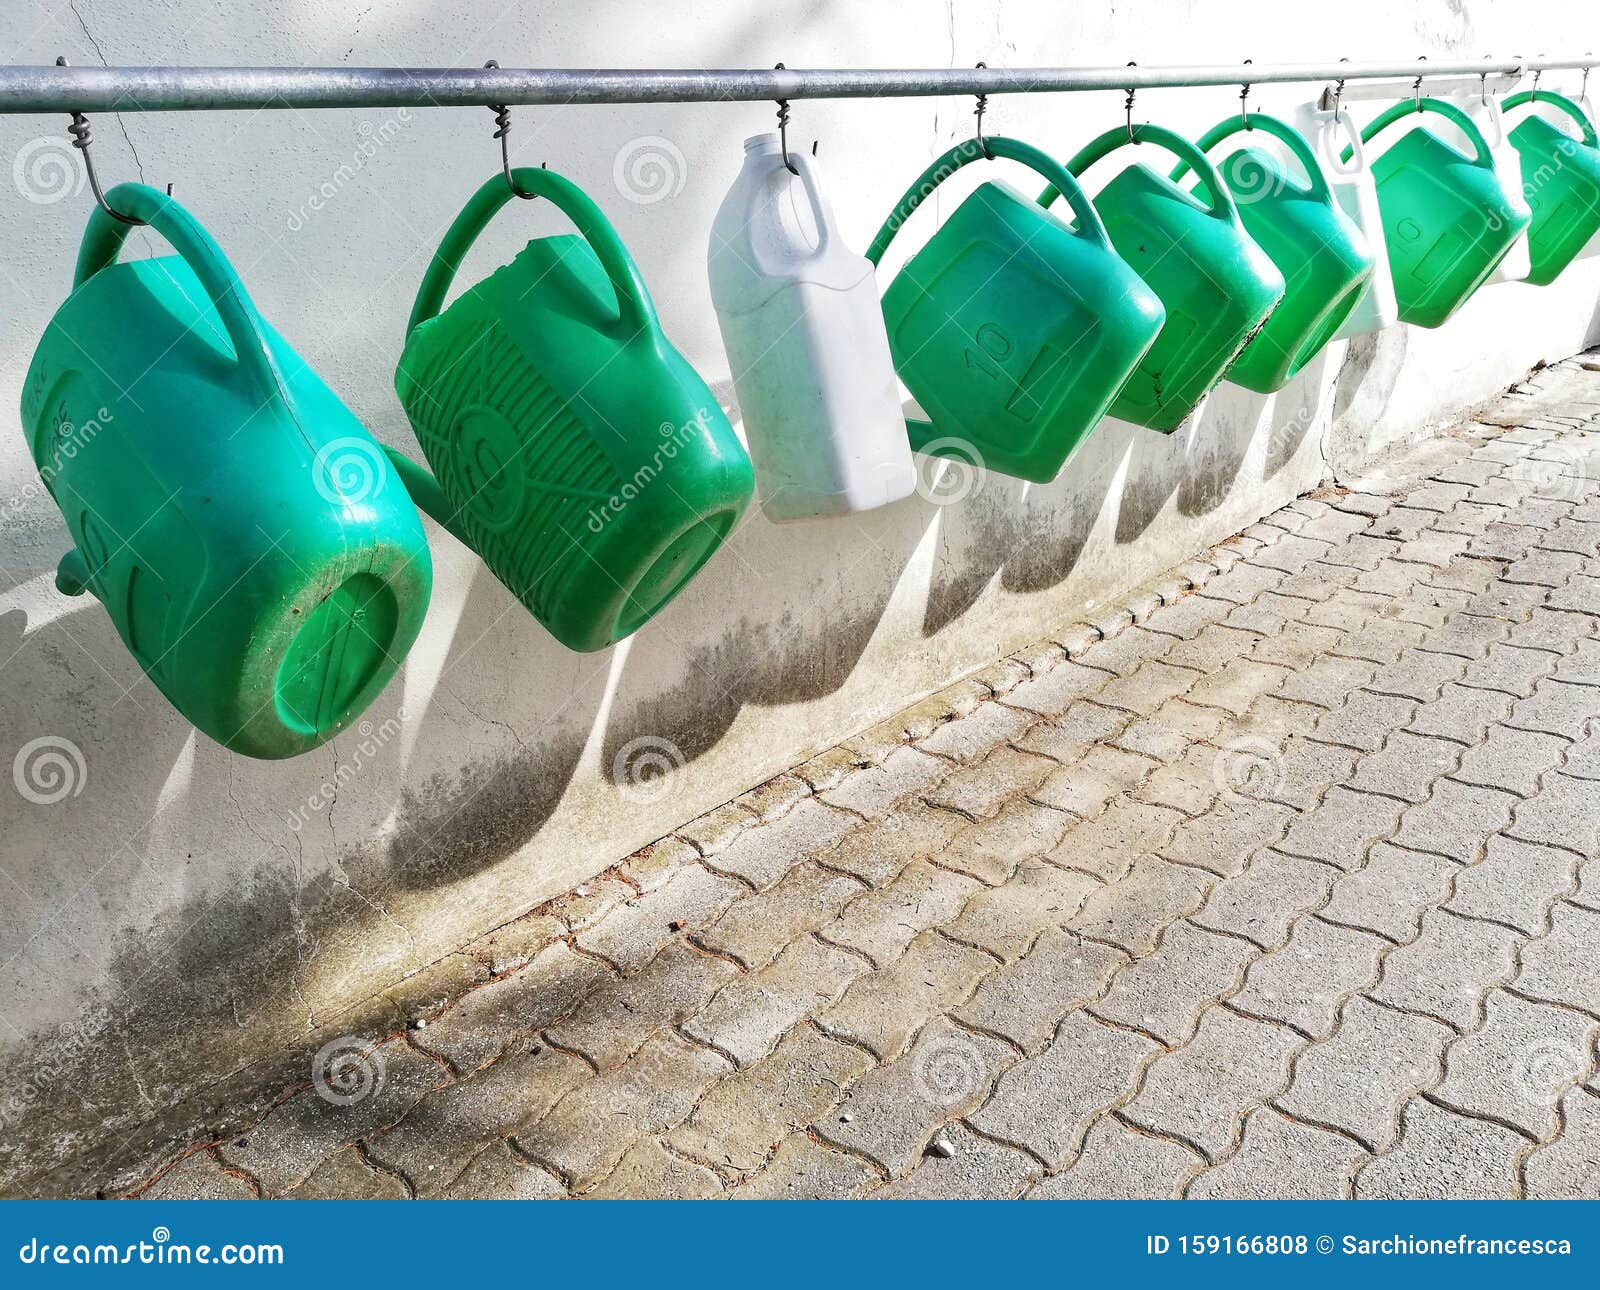 watering cans hanging in a row